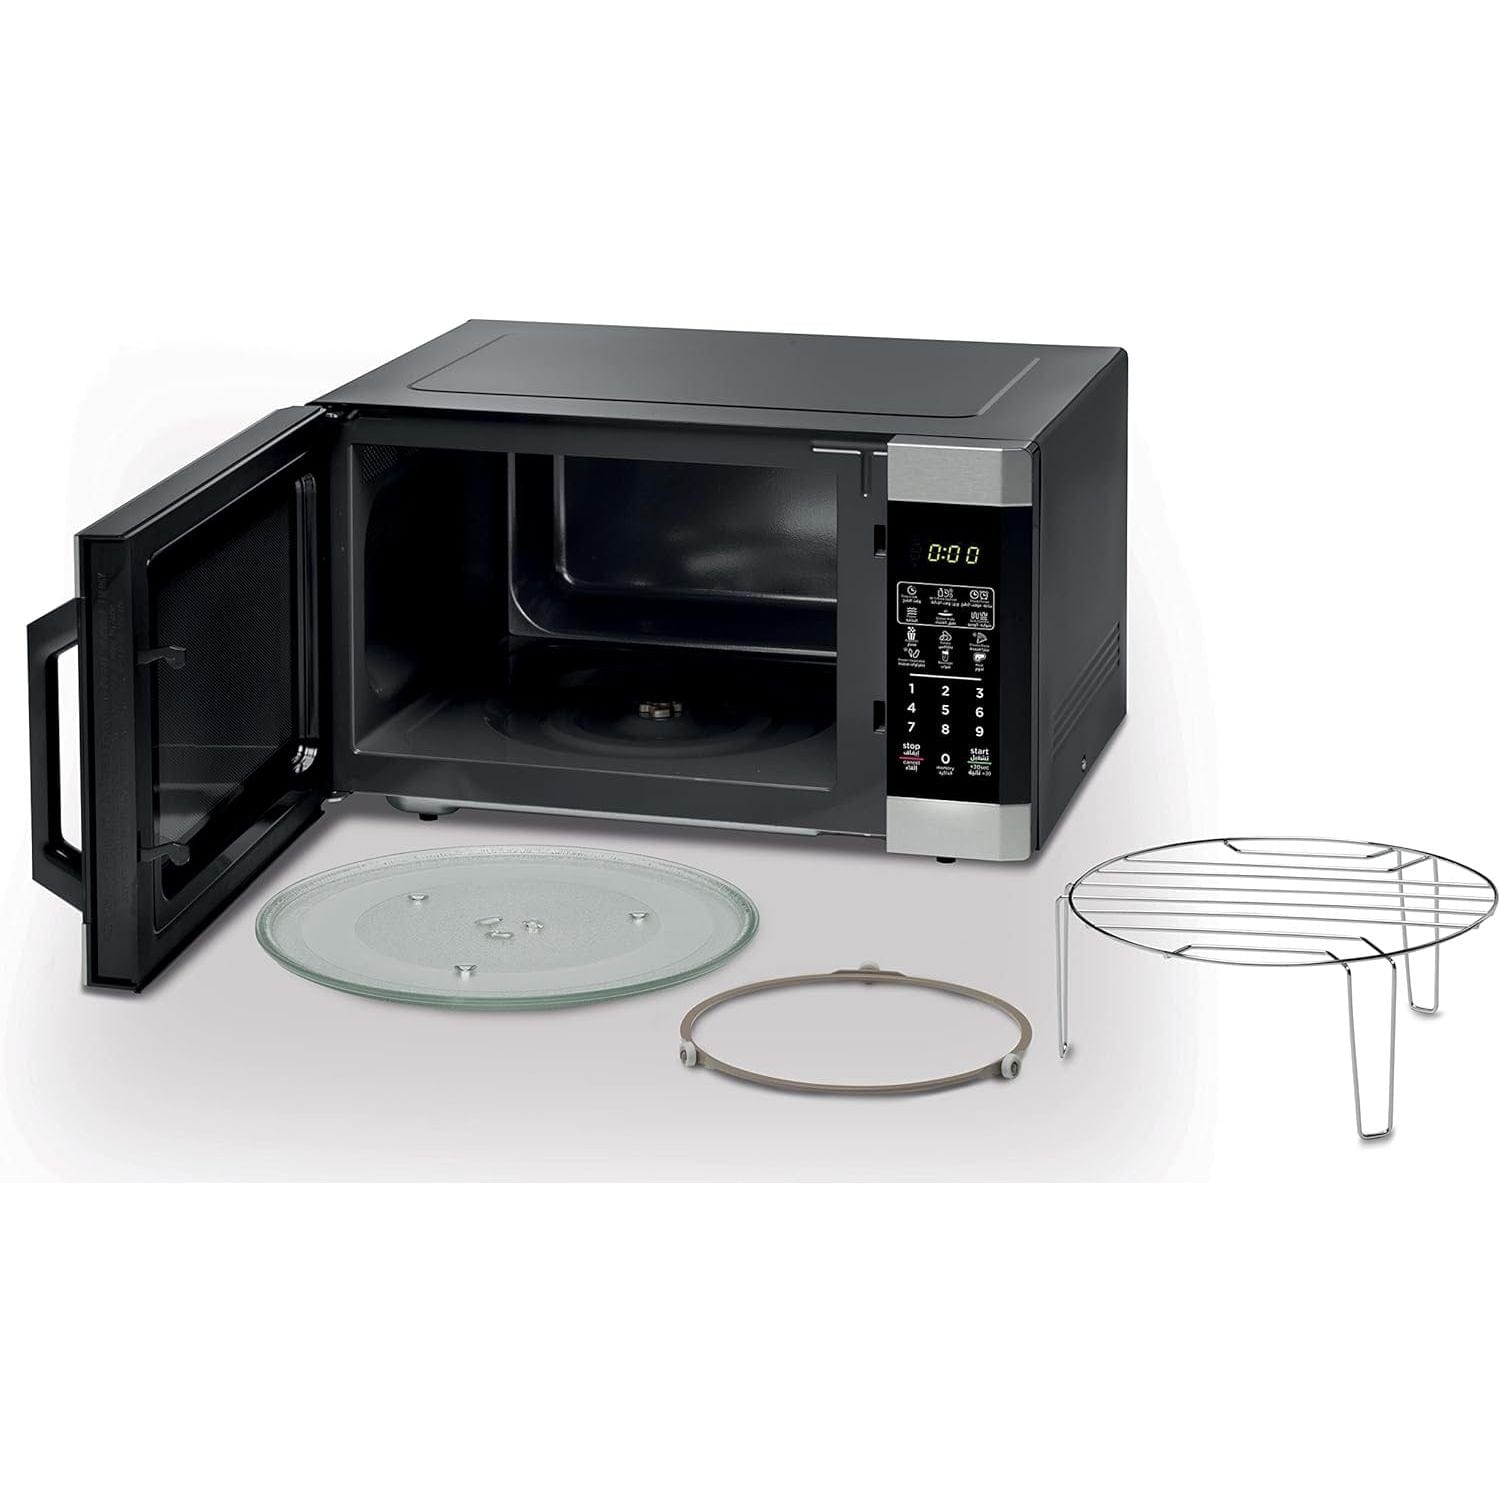 Kenwood Microwave Oven with Grill 42L